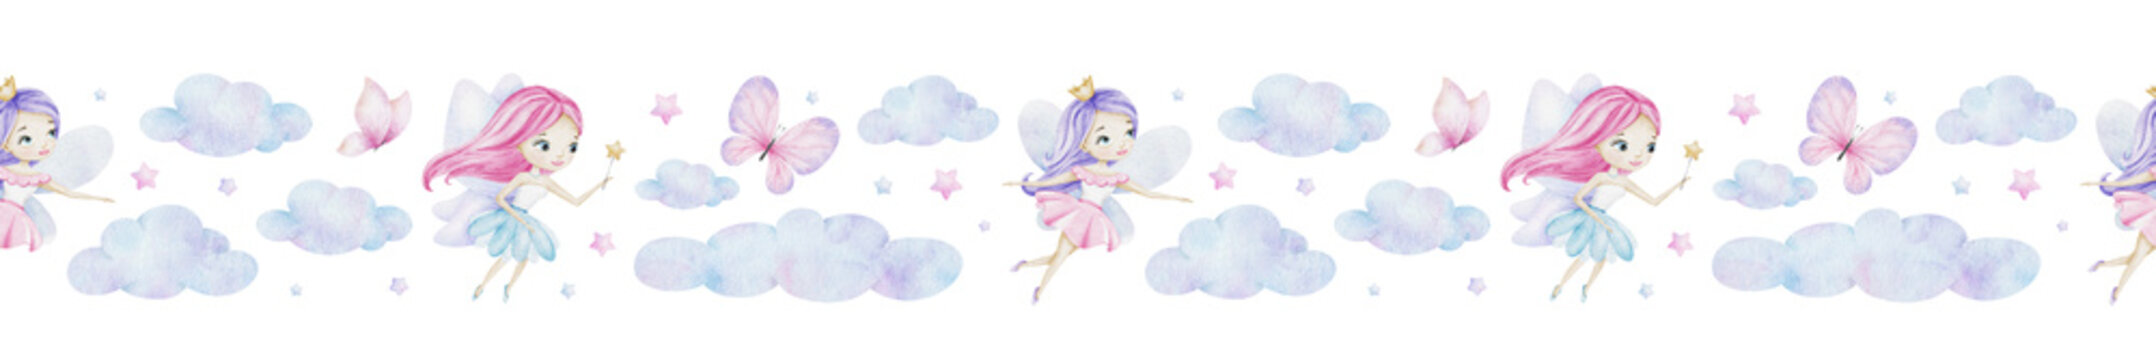 Cute little fairy with magic wand, stars, clouds and butterflies. Watercolor seamless border for children's goods, clothes, postcards, baby shower and nursery, fabric